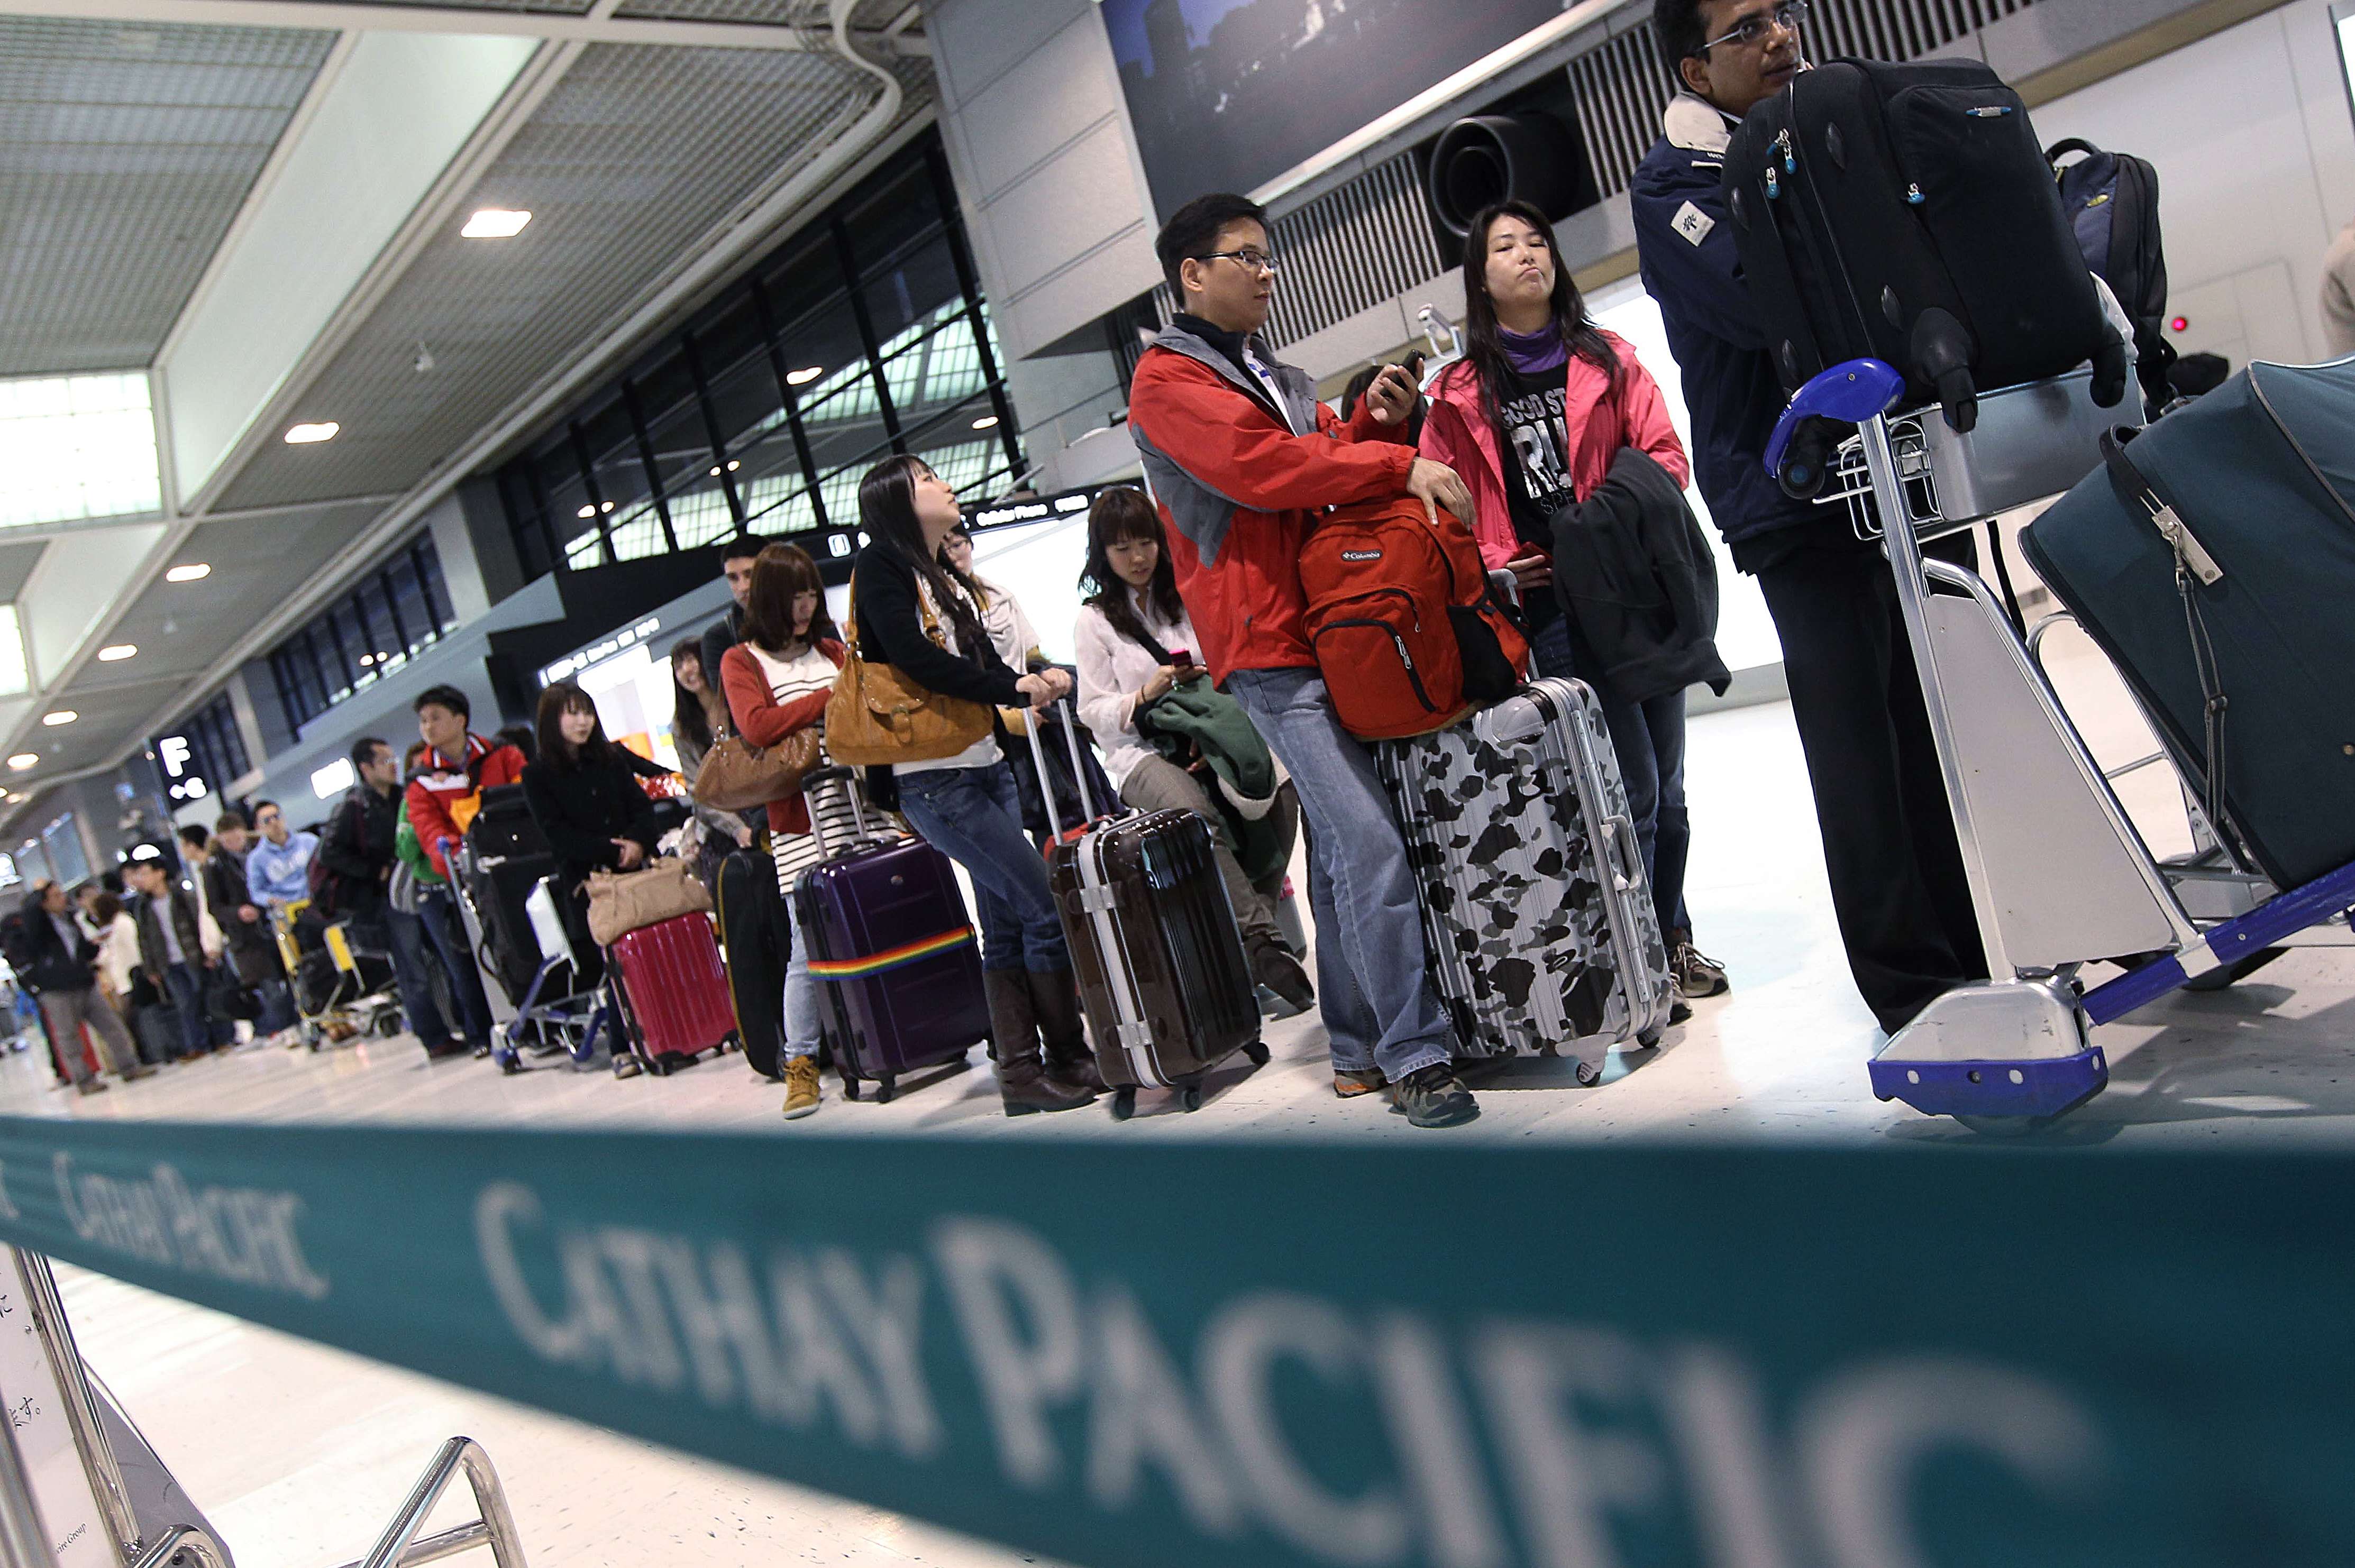 To speed up the check-in process and whittle down queues, the airlines are also reviewing their baggage policy so that passengers are encouraged to have fewer pieces of luggage.